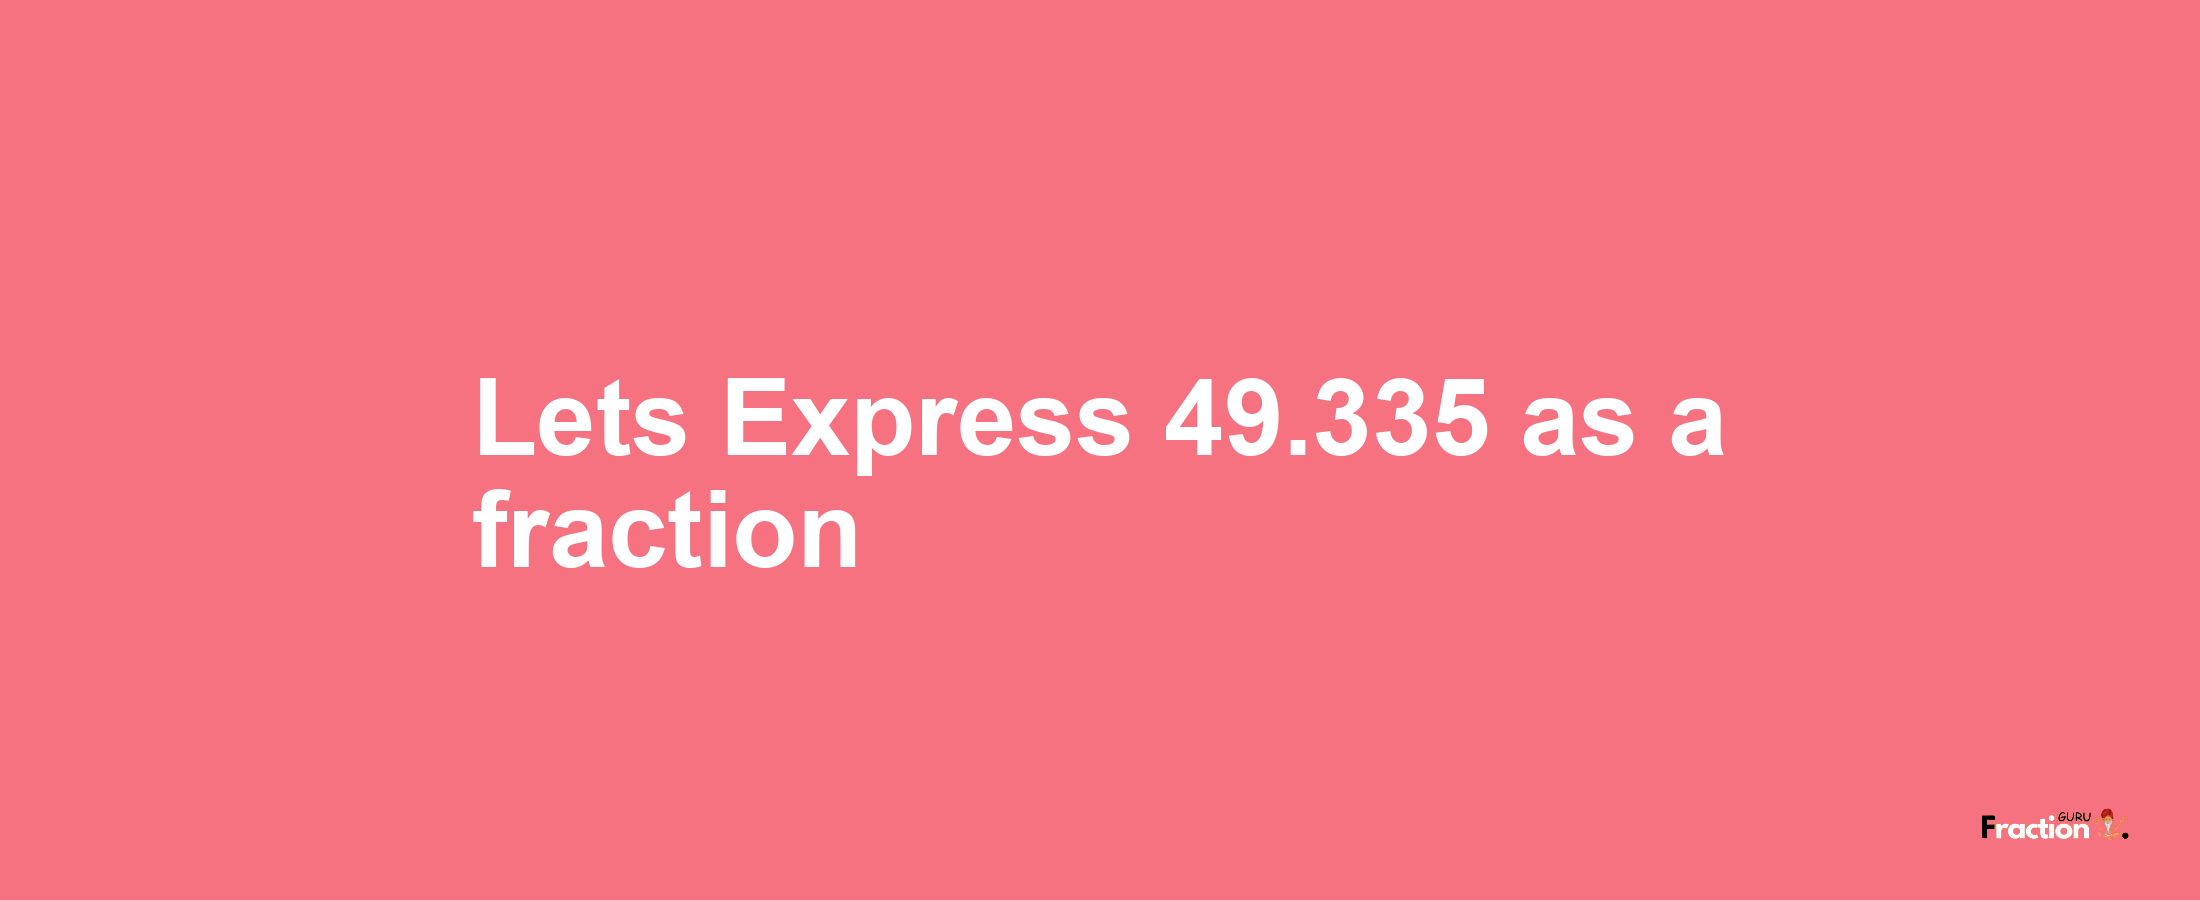 Lets Express 49.335 as afraction